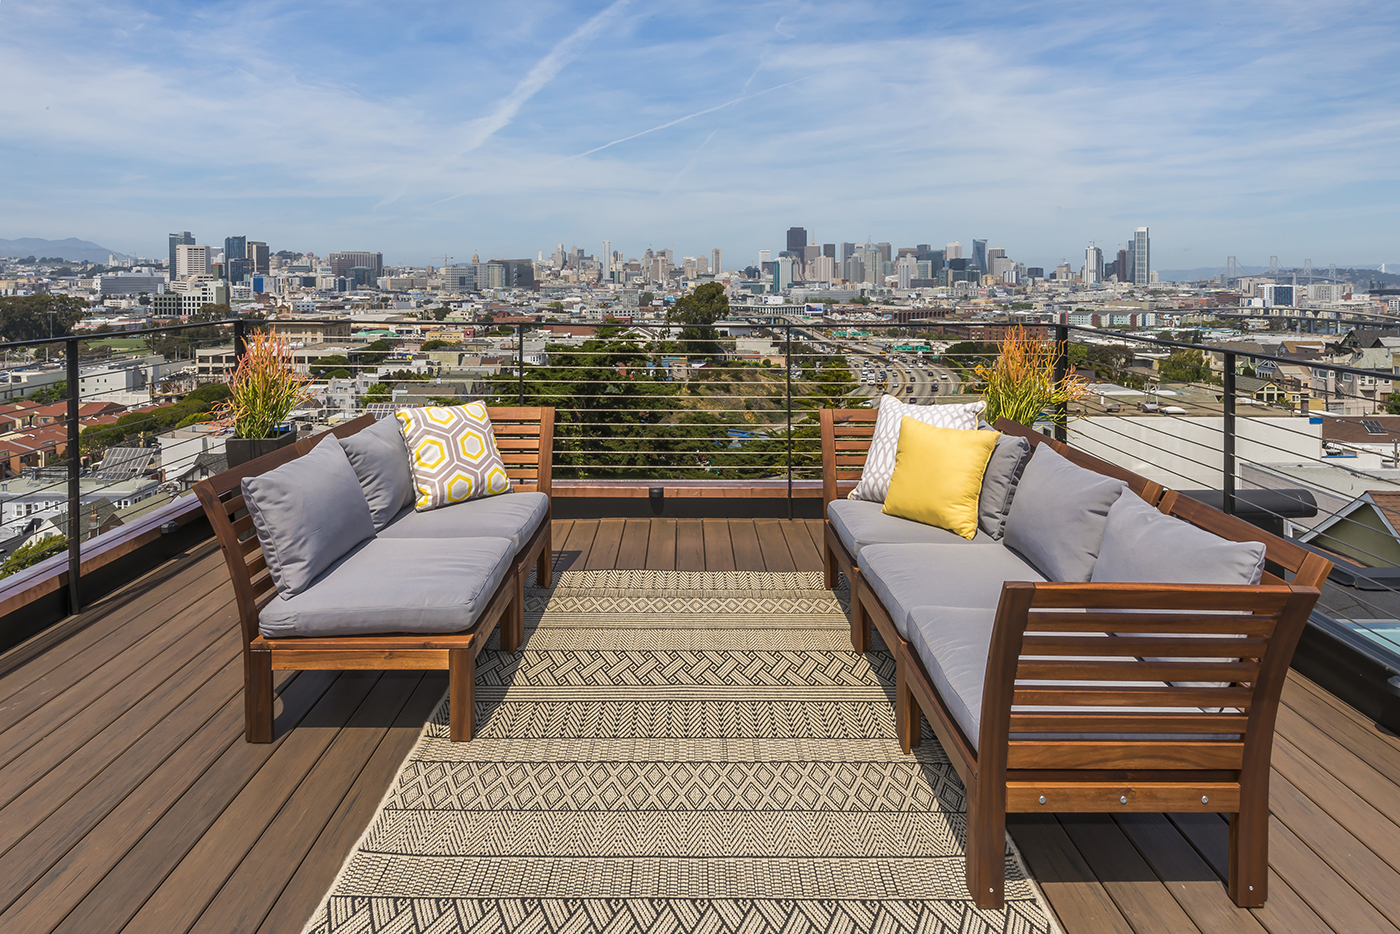 PROPERTY OF THE WEEK: 2324 19TH ST, SAN FRANCISCO | OFFERED AT ...